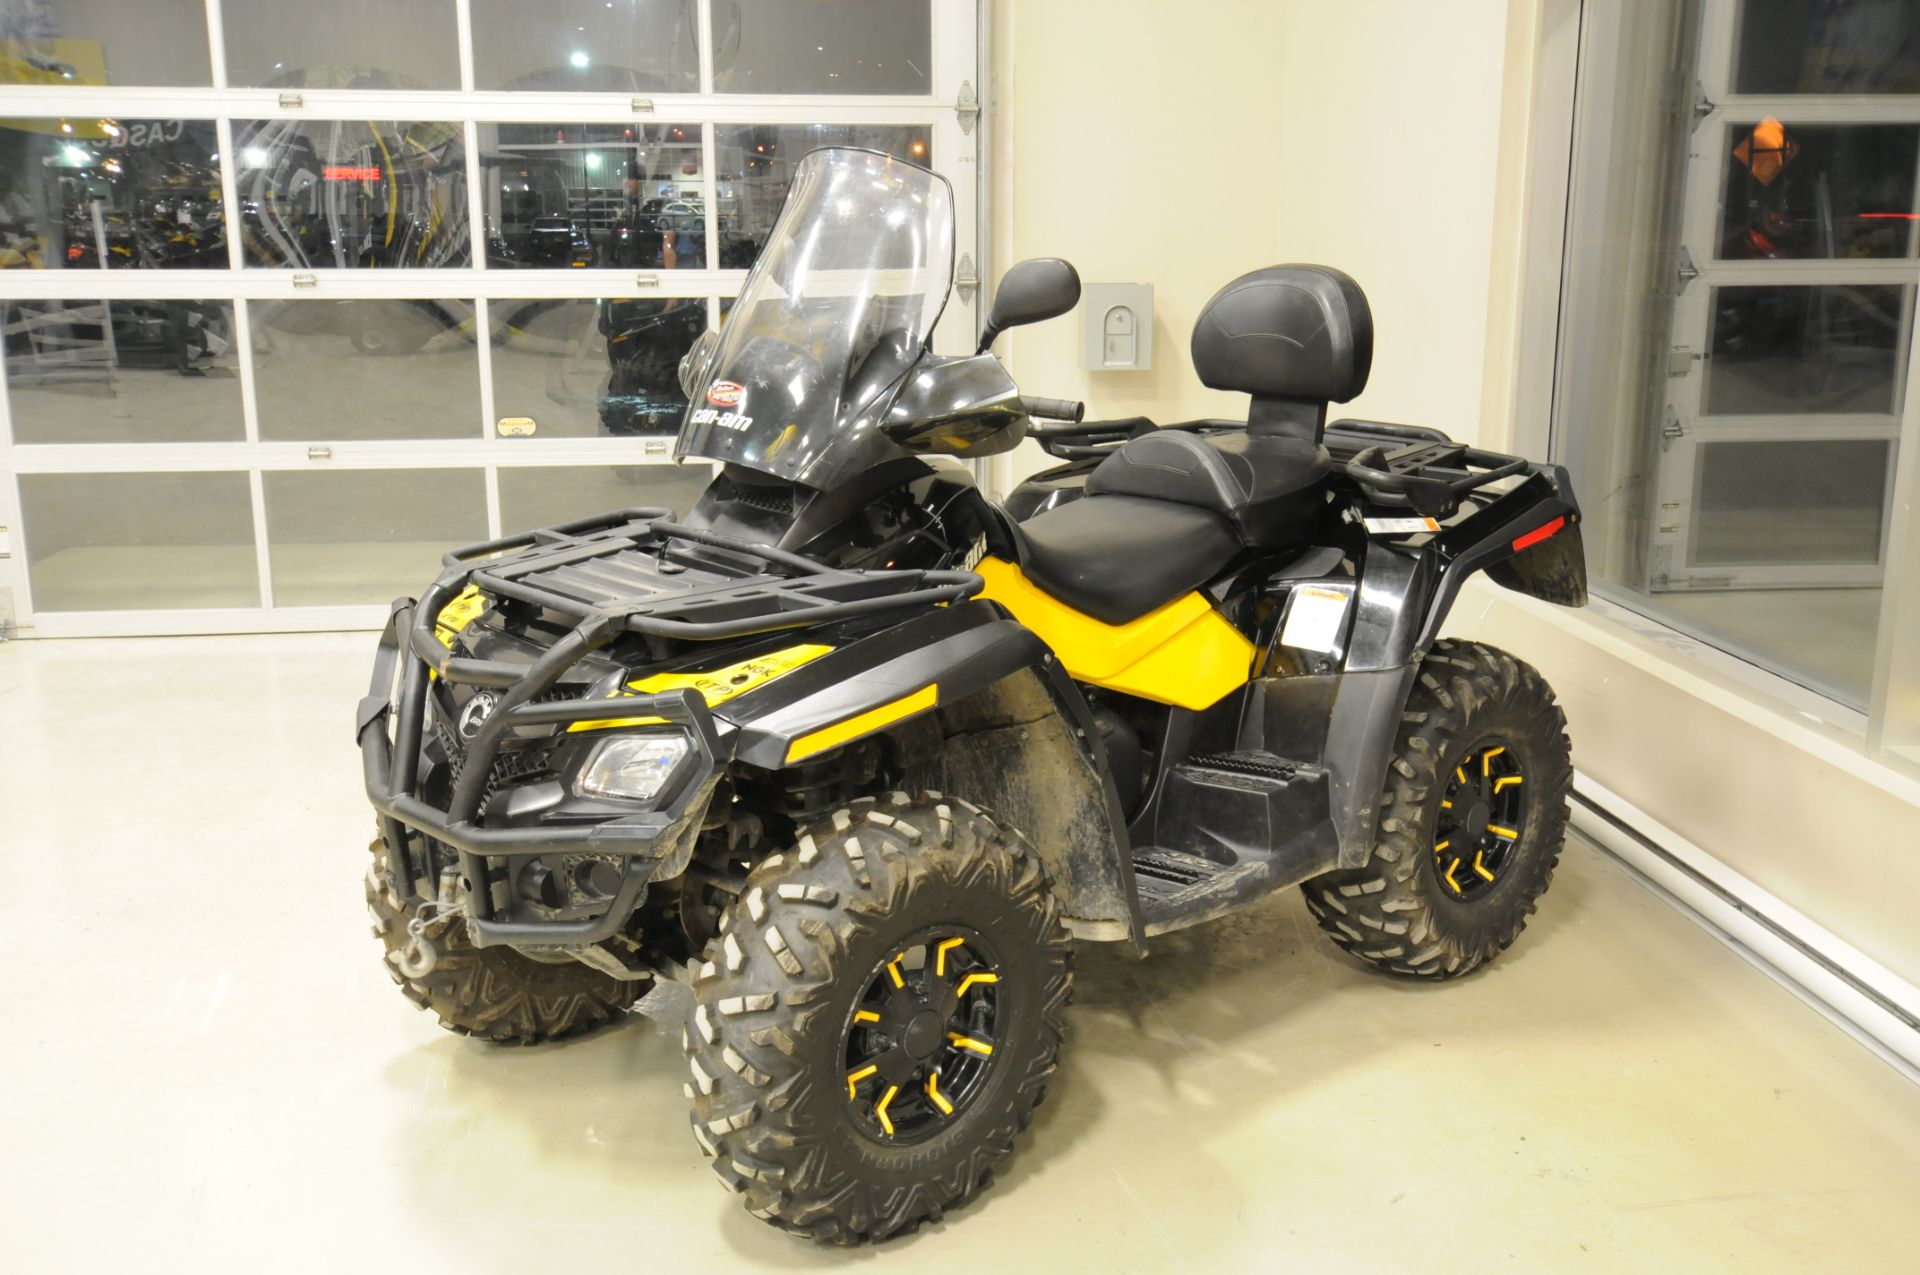 BRP CAN AM (2011) MAX800 ATV AVEC MOTEUR ROTAX 800R V-TWIN 4-TEMPS, 4X4, WARN TREUIL A CABLE AVANT - Image 4 of 6